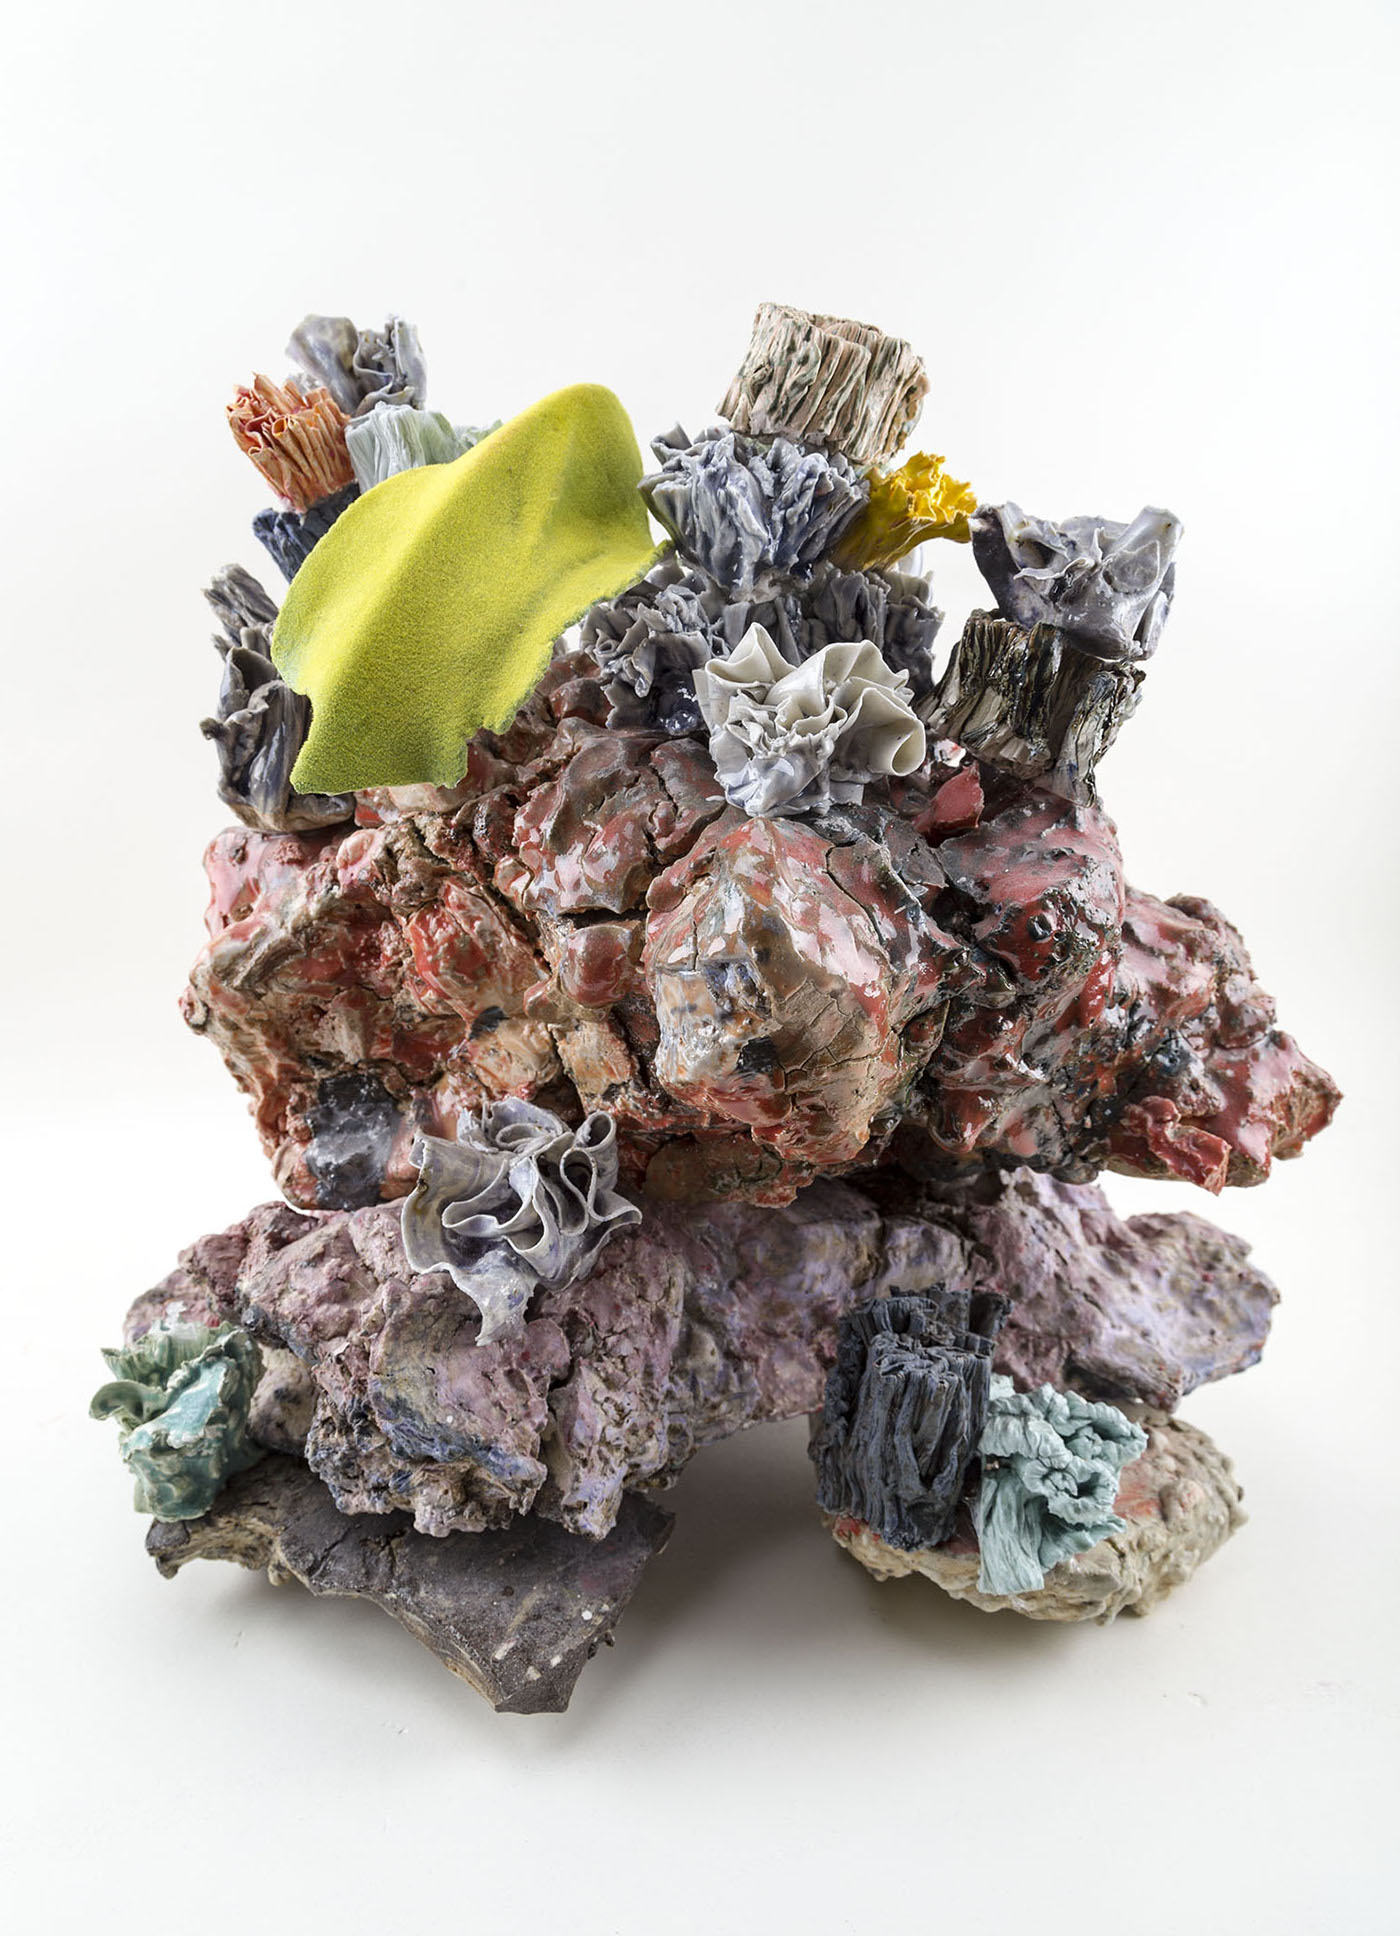 conglomerate rocks surface texture ceramics  sculpture geological coral floral